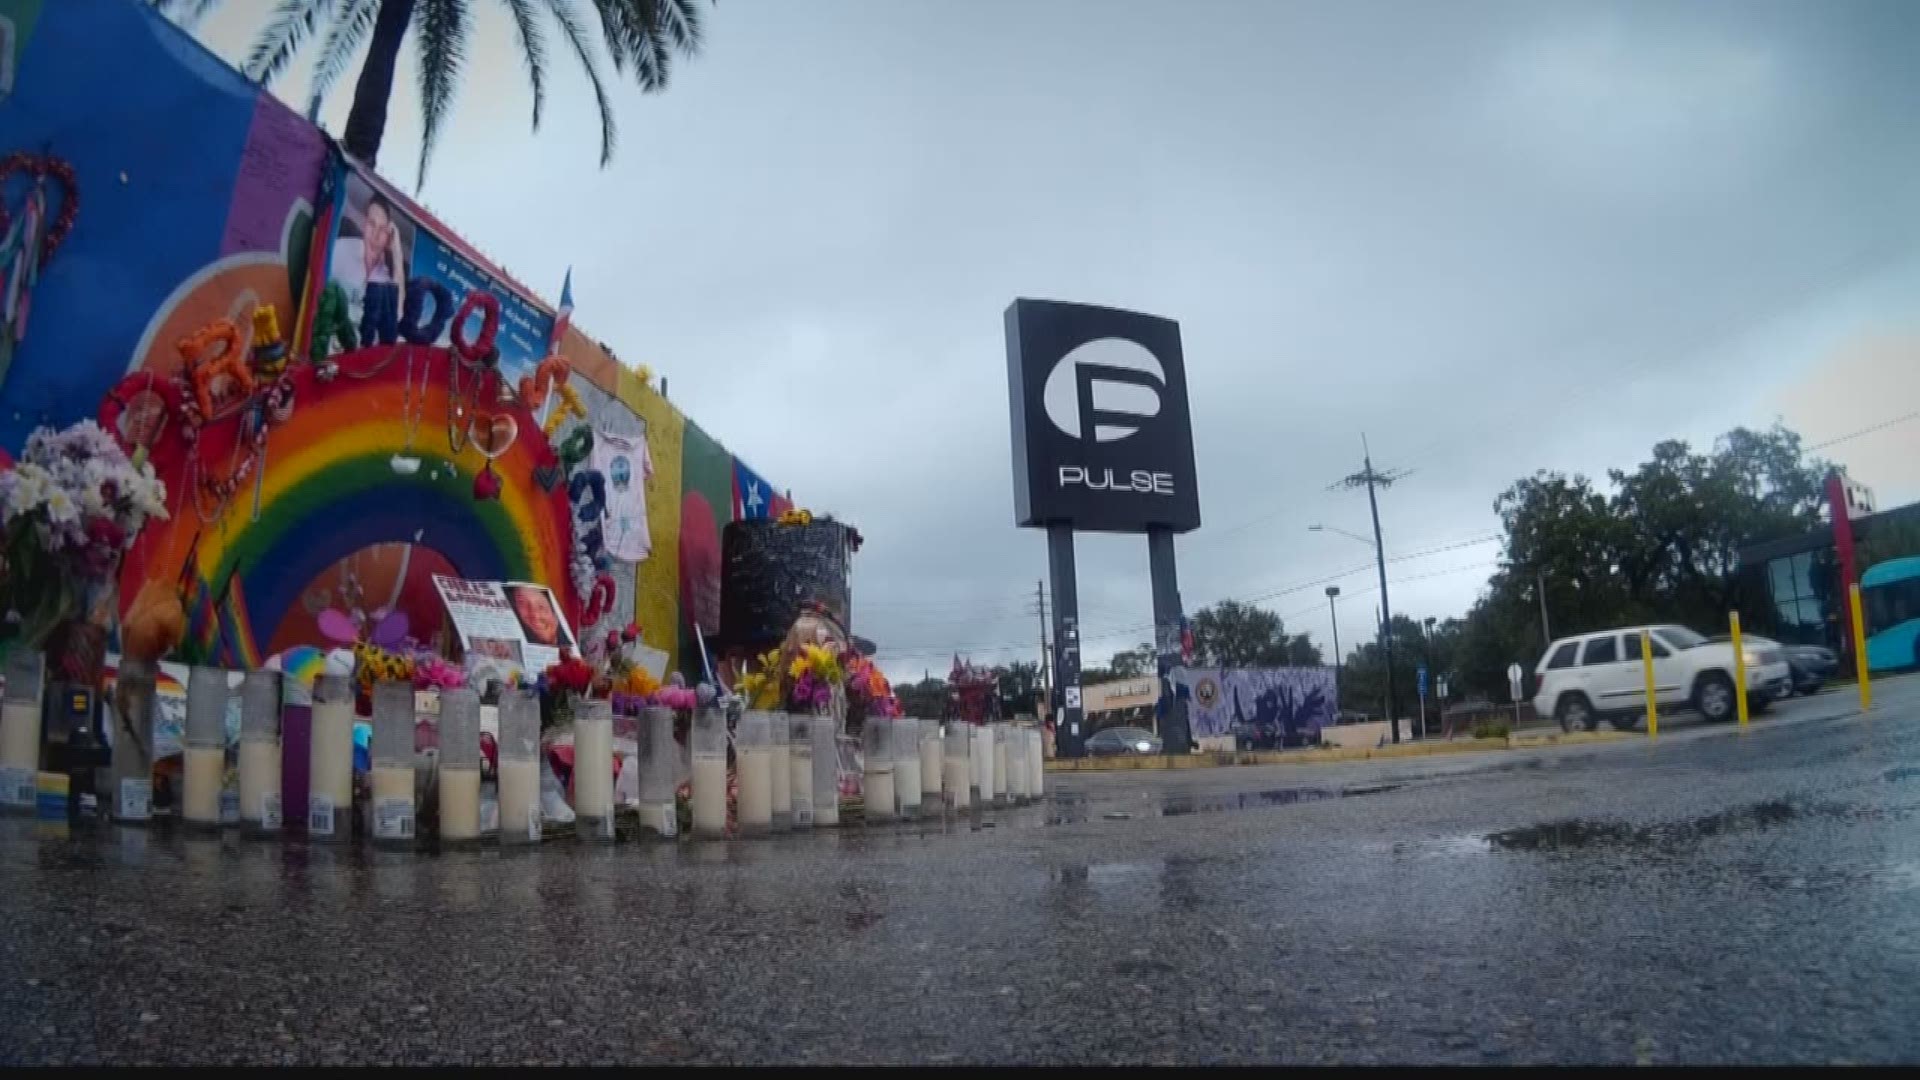 Events and memorials were held throughout Orlando to remember the massacre at Pulse.